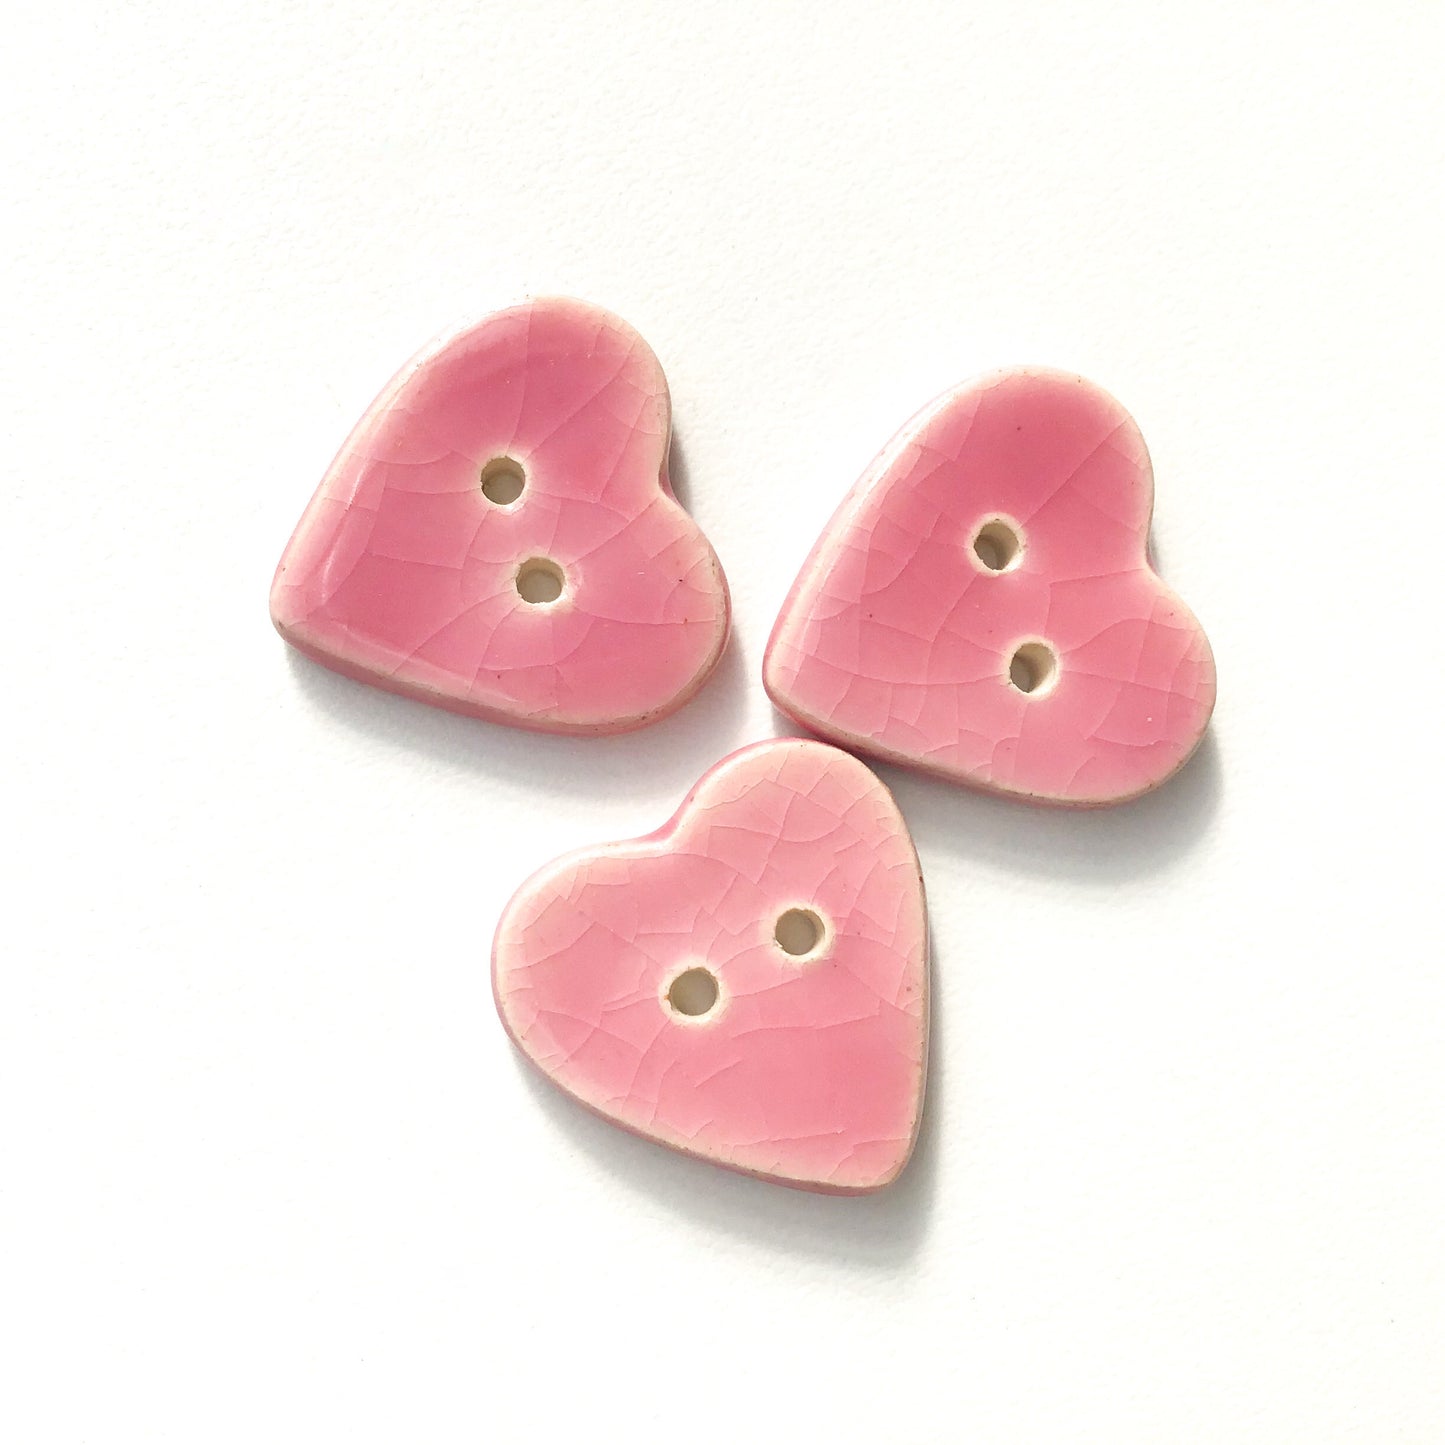 Crackle Pink Heart Buttons   7/8"